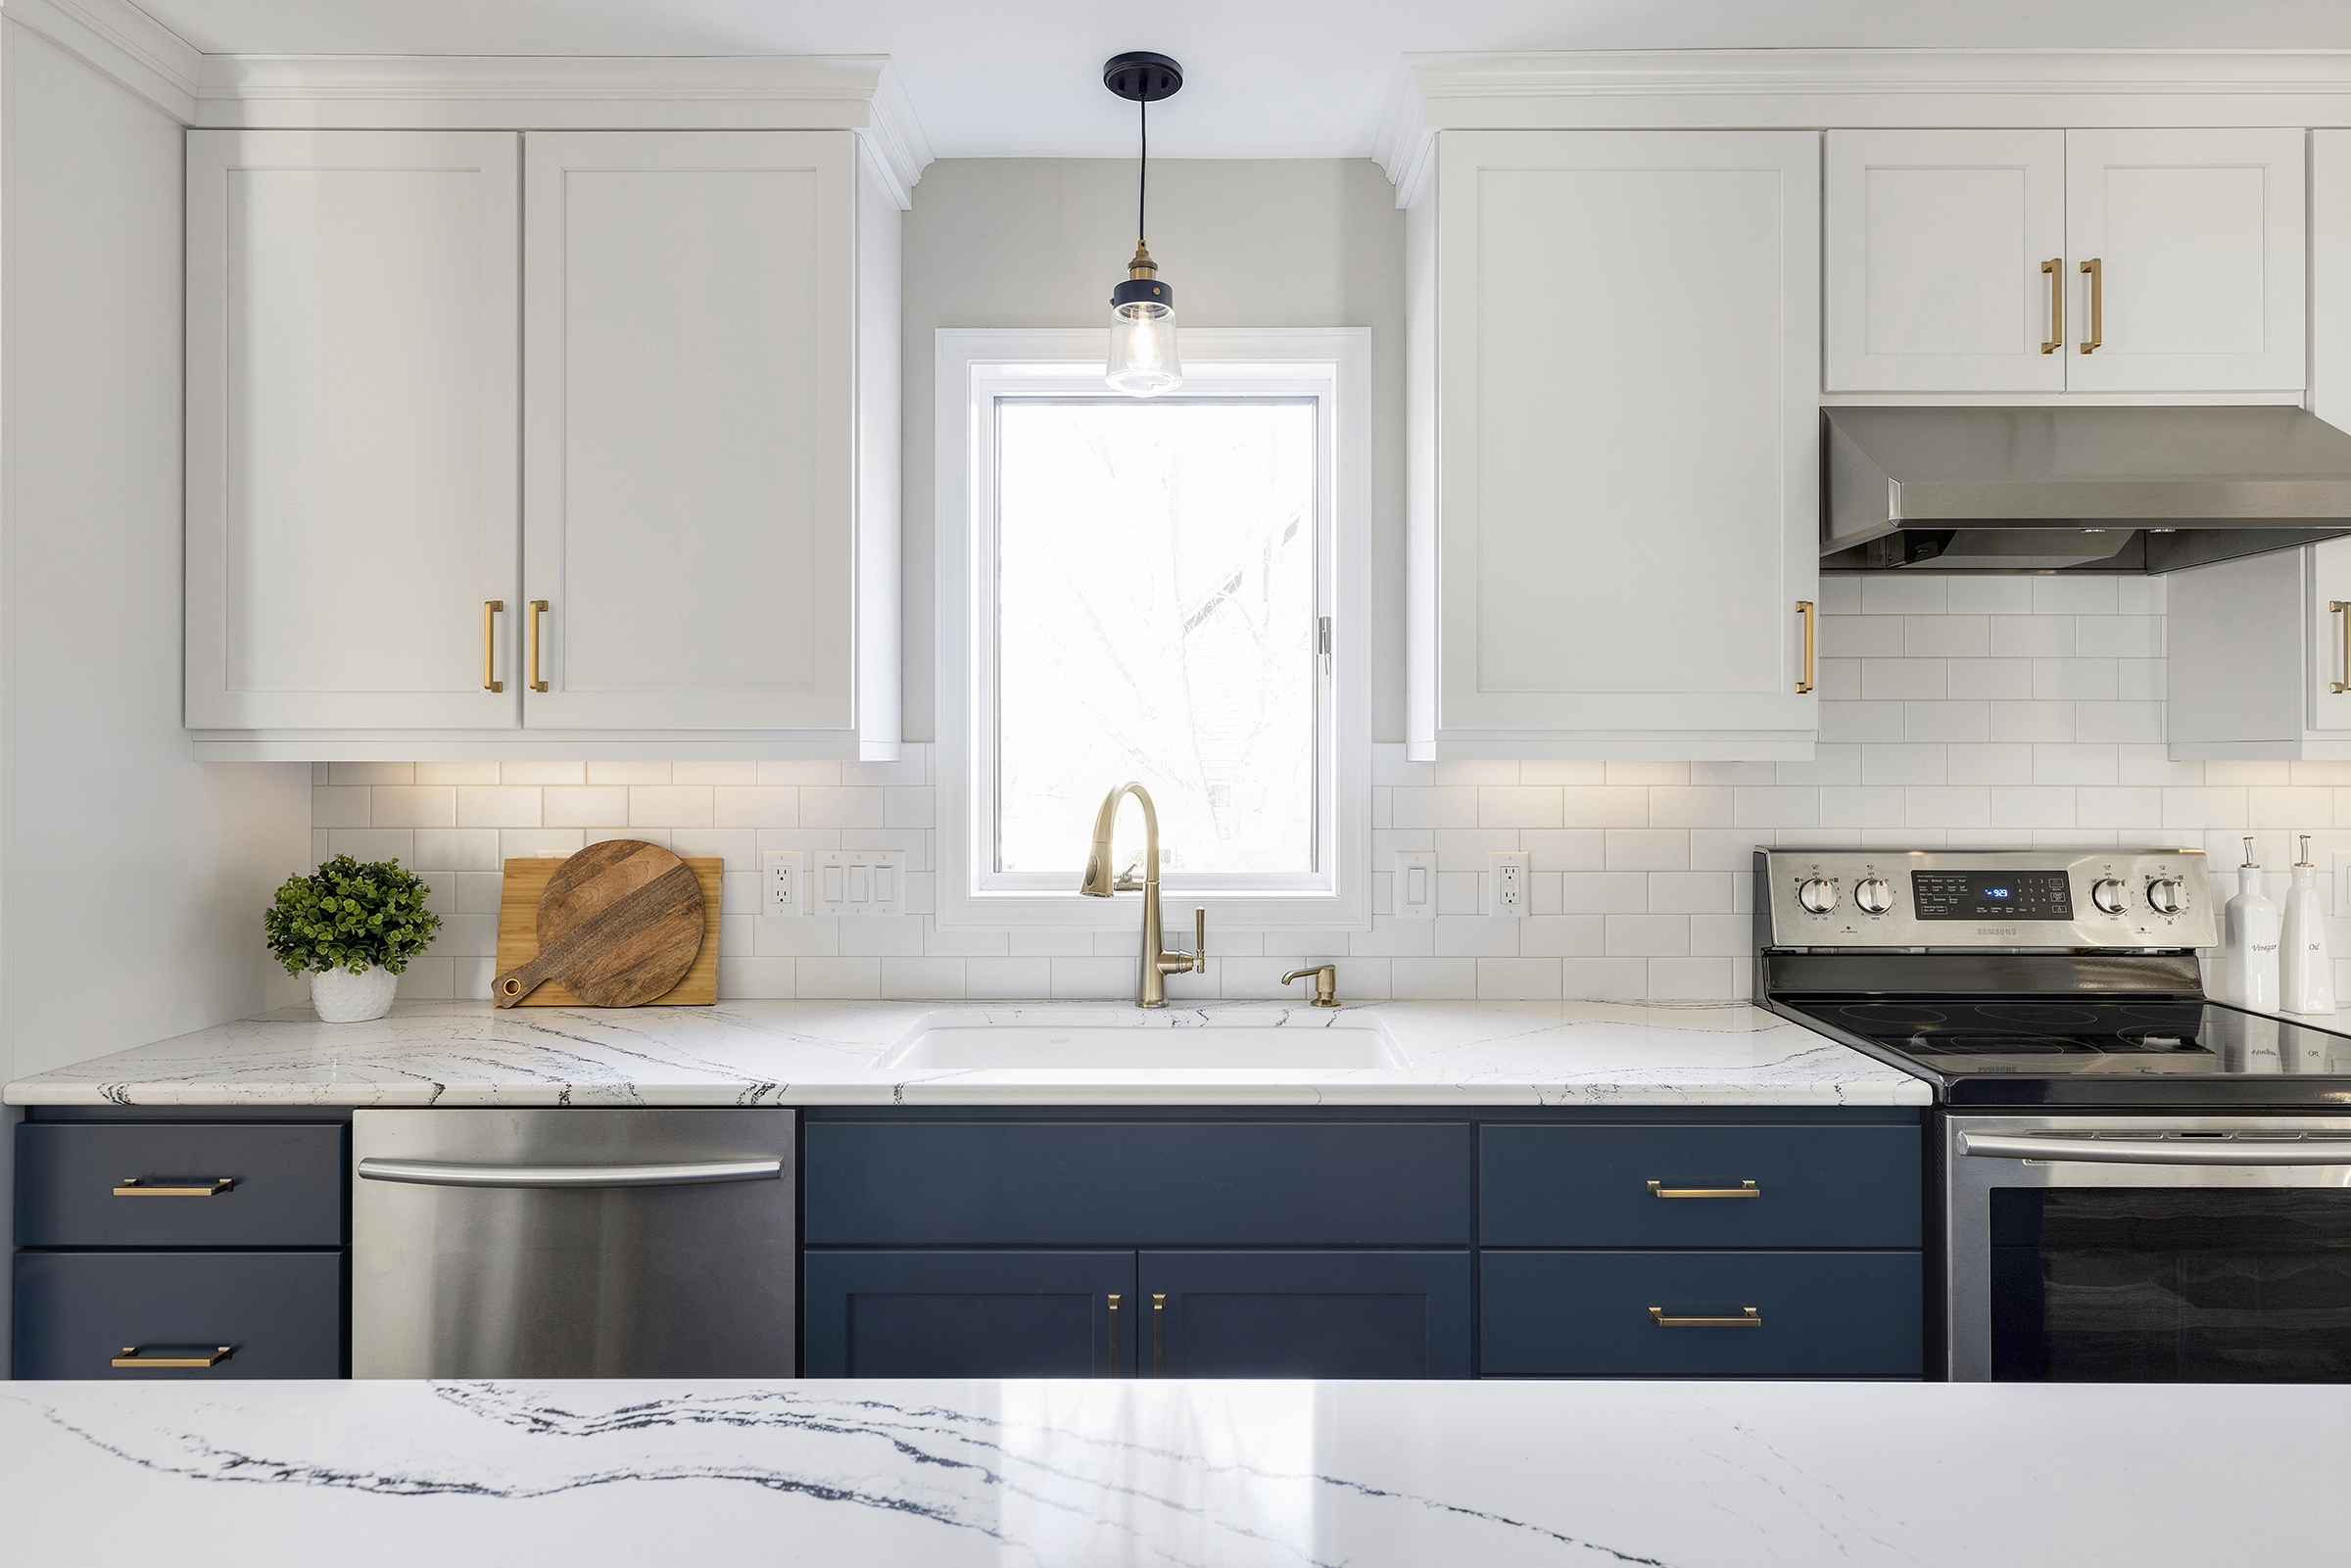 Renovated kitchen with white upper cabinets, blue lower cabinets, and window over sink with light